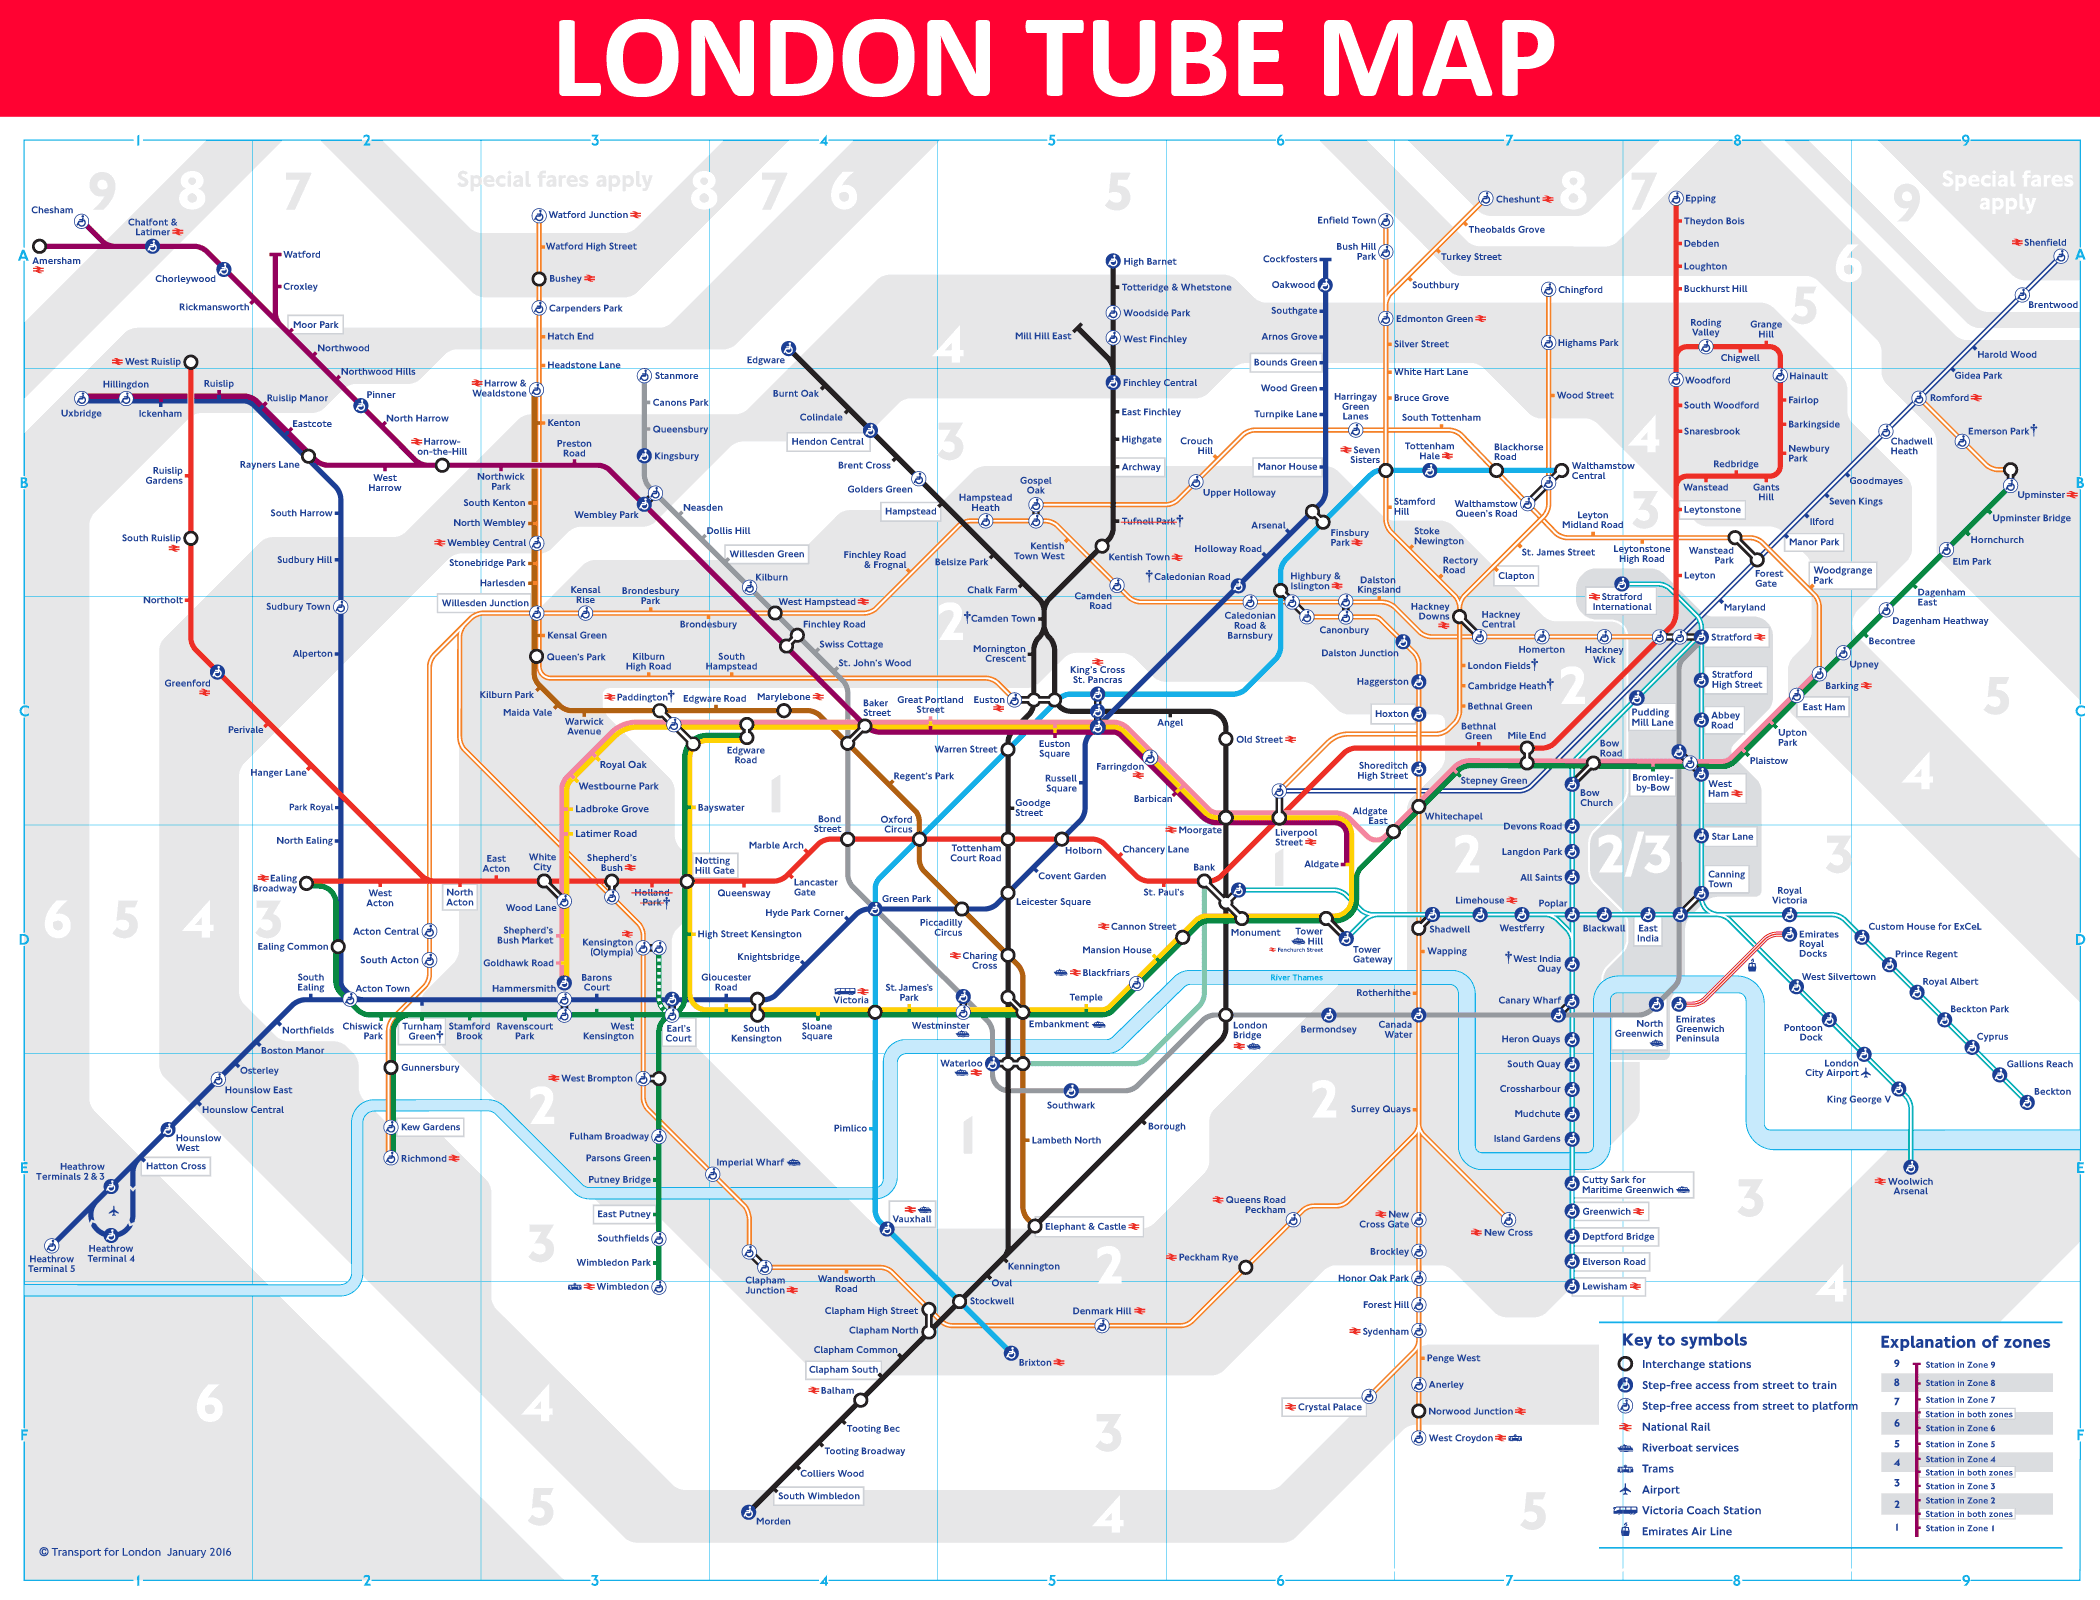 Hammersmith London Tube Map London Tube Map 2019   Lines, Times, Tickets, Tourist Info